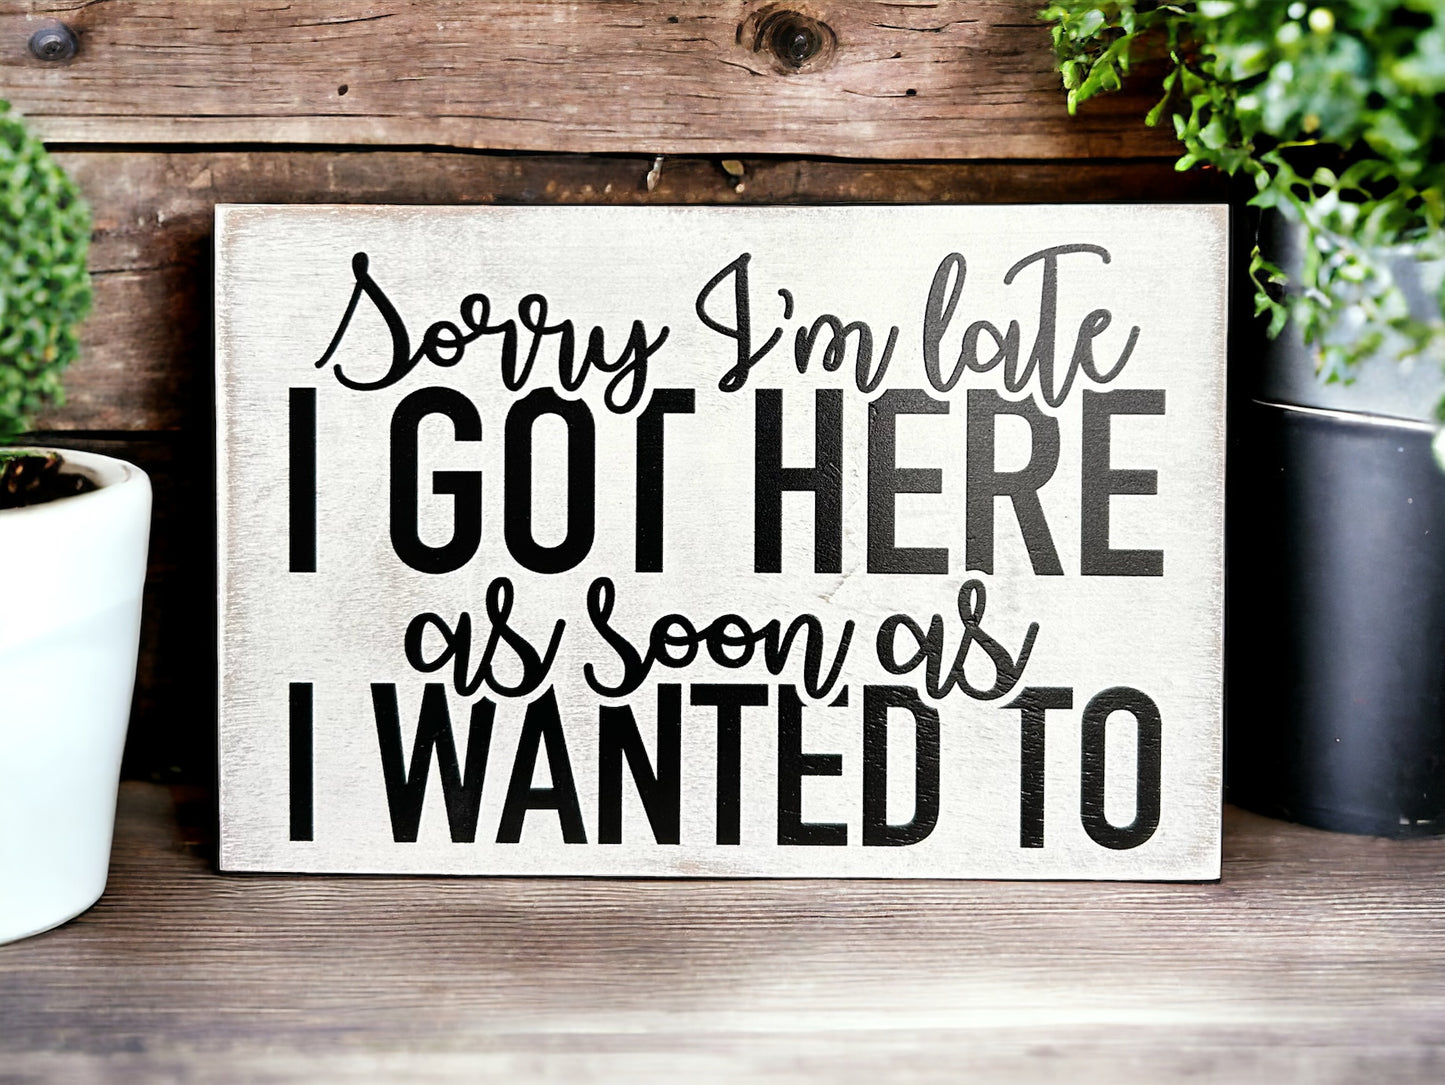 Sorry I'm Late - Funny Wood Sign 4” x 6”